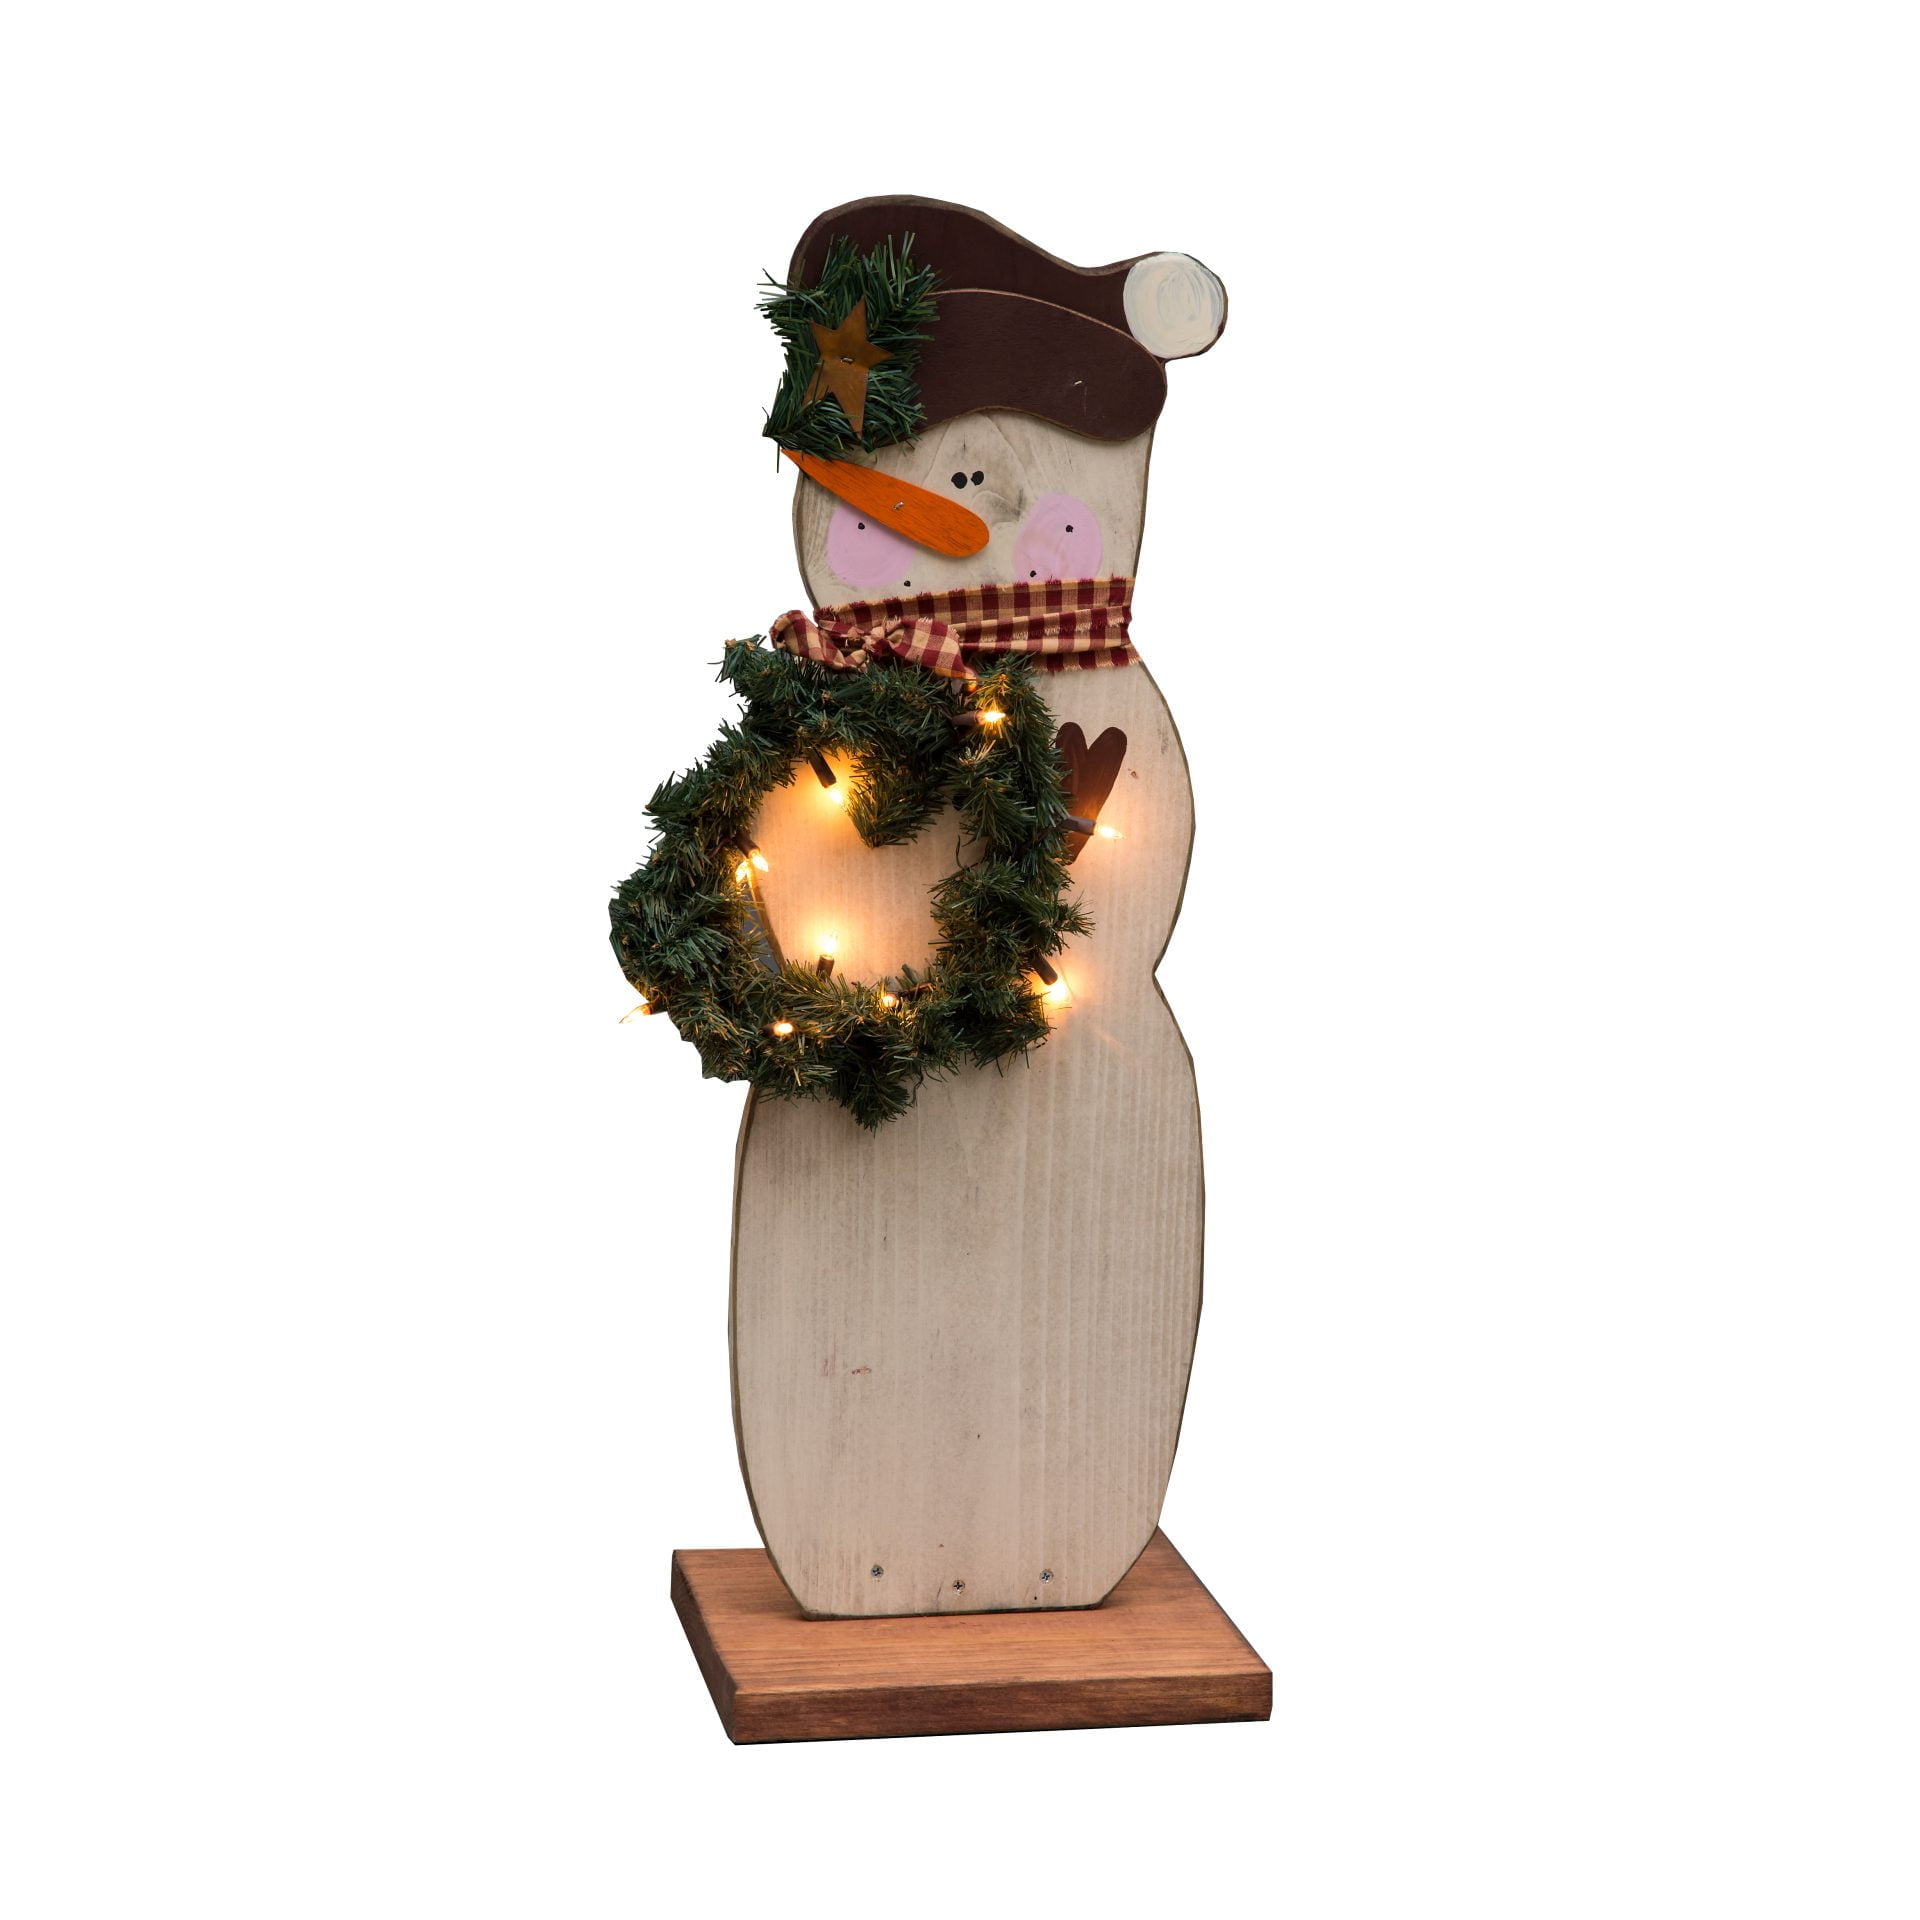 32″ Wooden Christmas Standing Snowman with Wreath and Lights